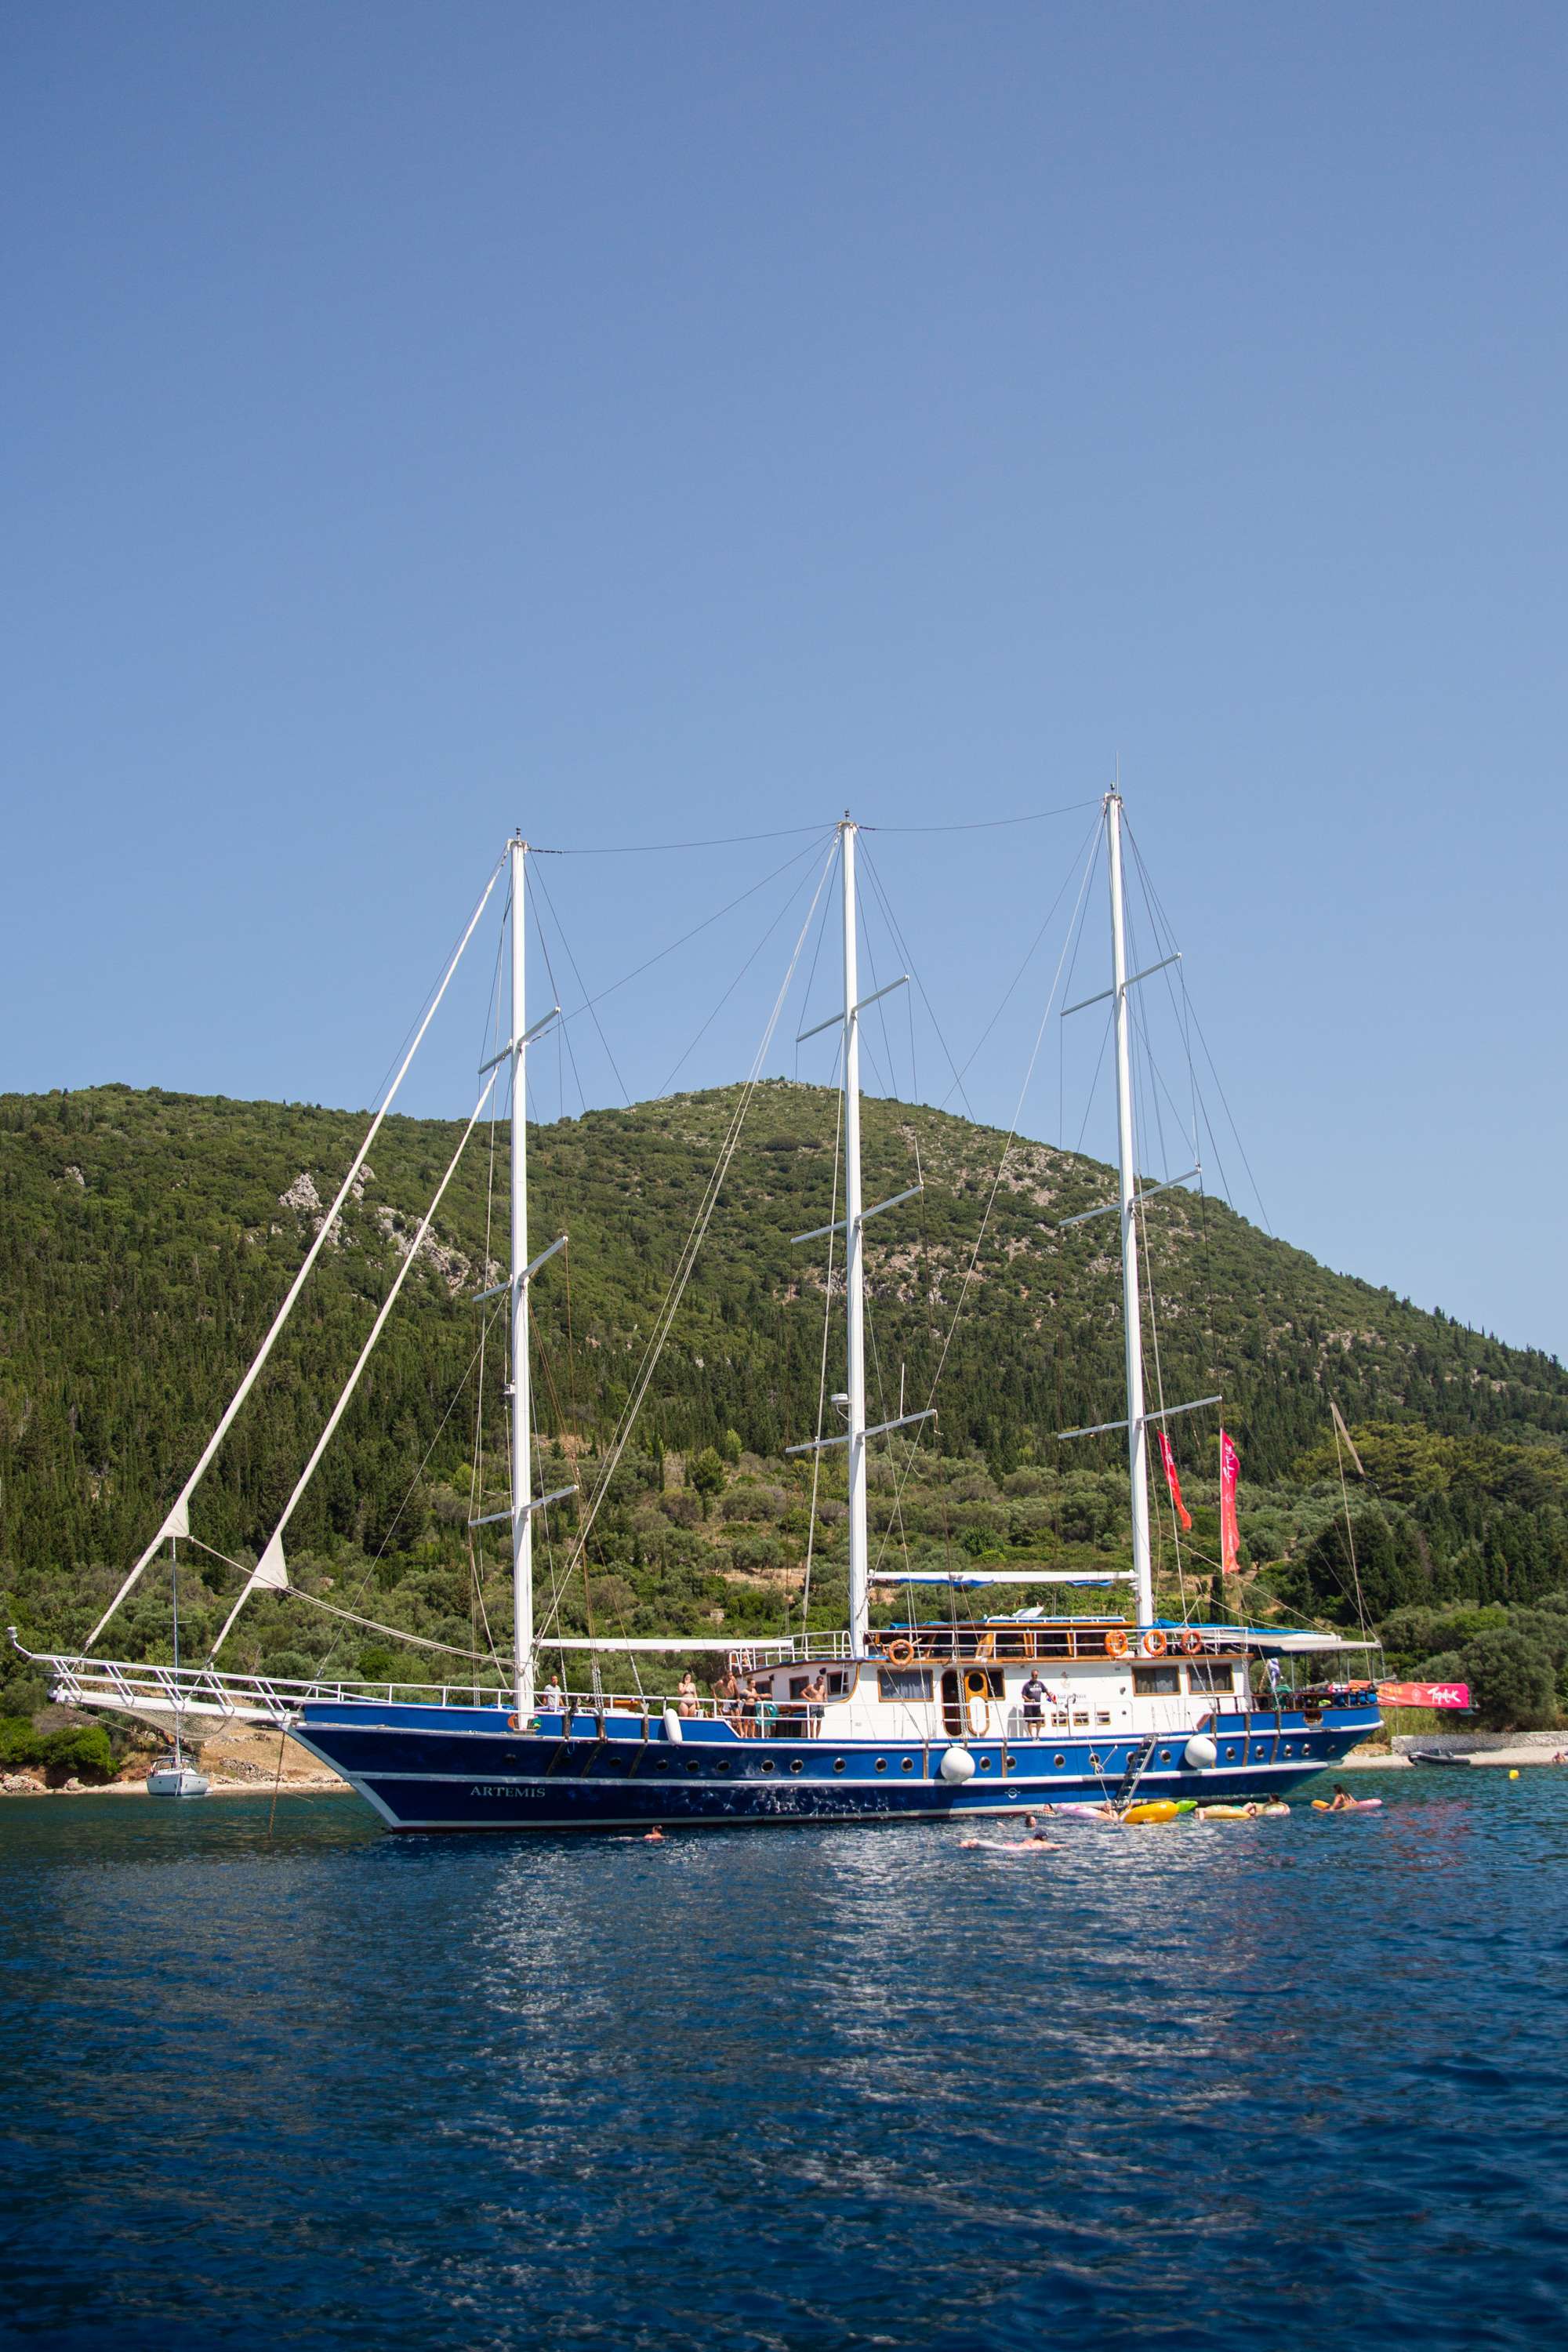 artemis - Yacht Charter Naxos & Boat hire in Greece 1